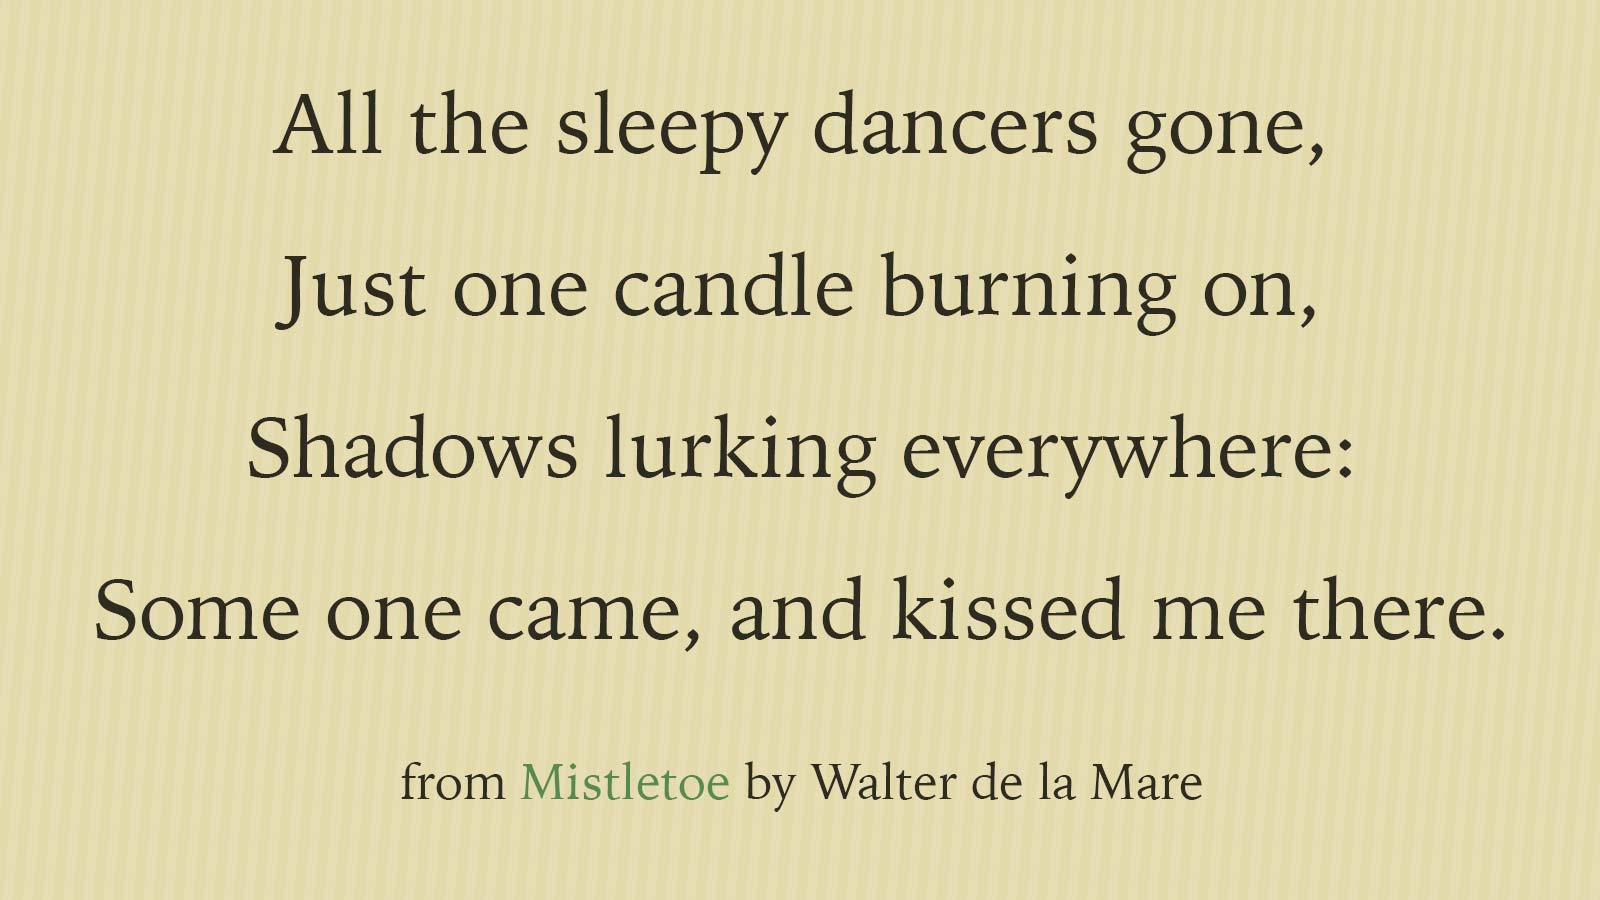 All the sleepy dancers gone, Just one candle burning on, Shadows lurking everywhere: Some one came, and kissed me there. From Mistletoe by Walter de la Mare.